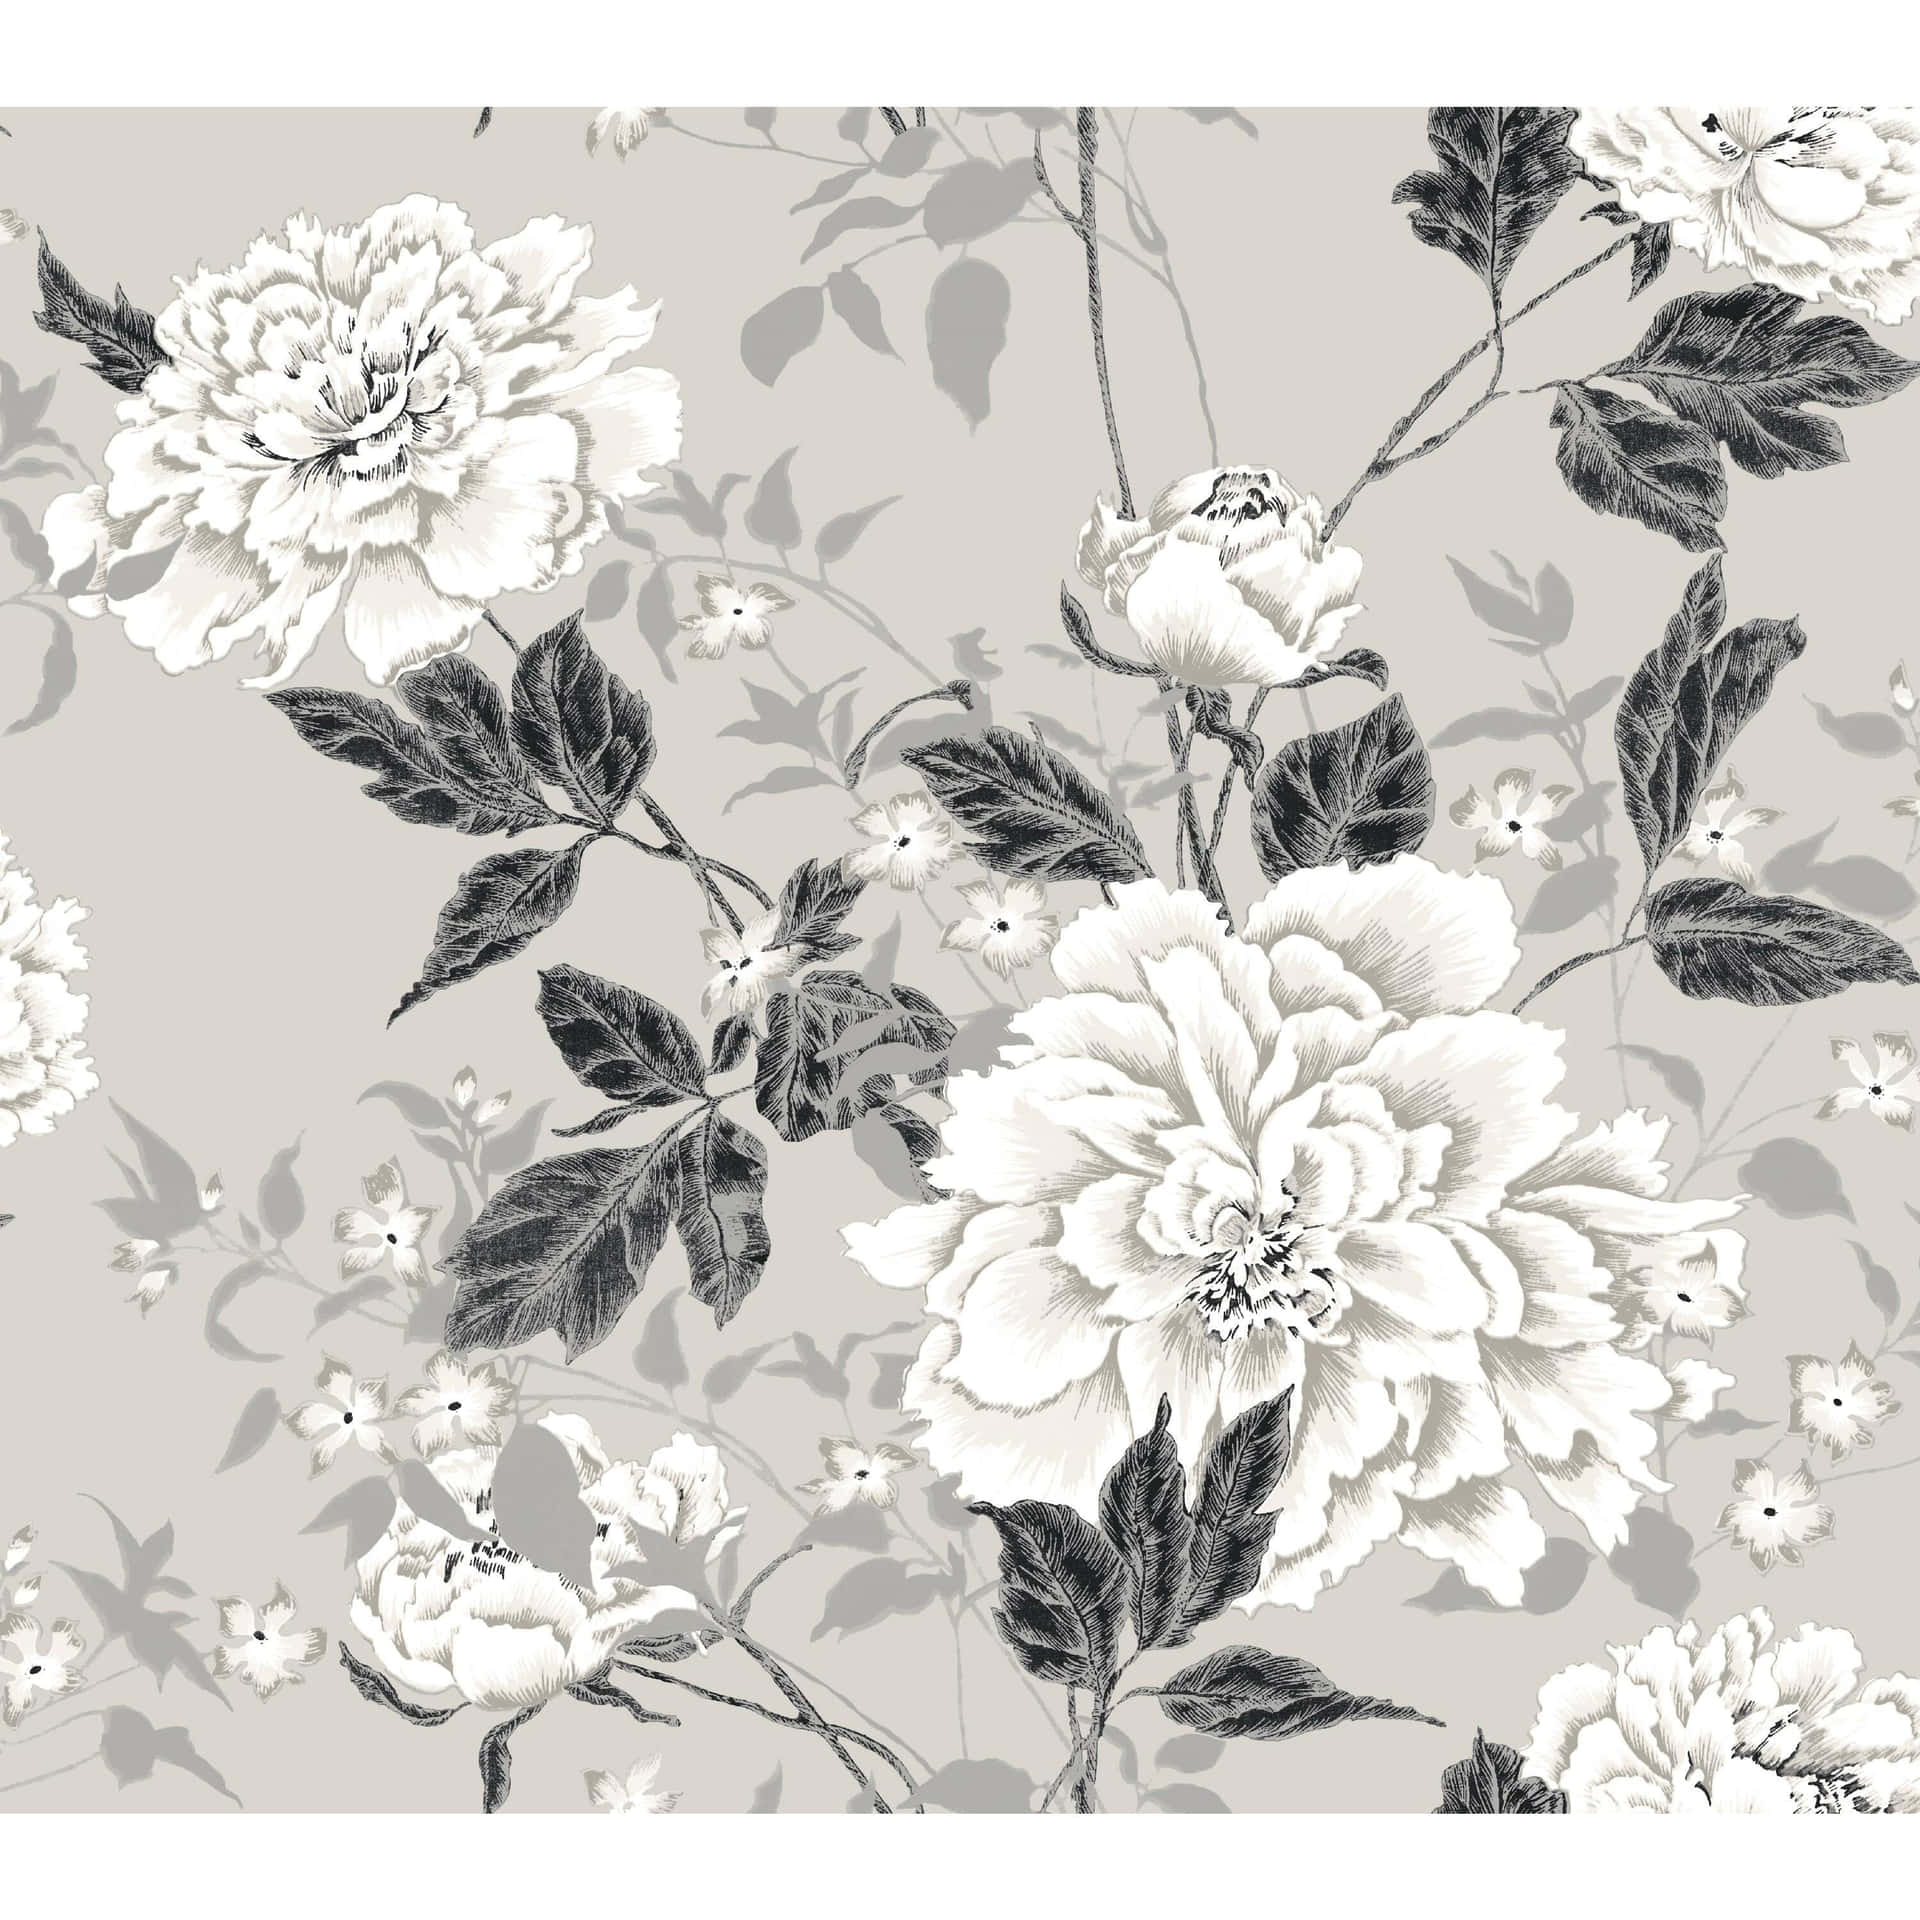 A beautiful vintage floral background